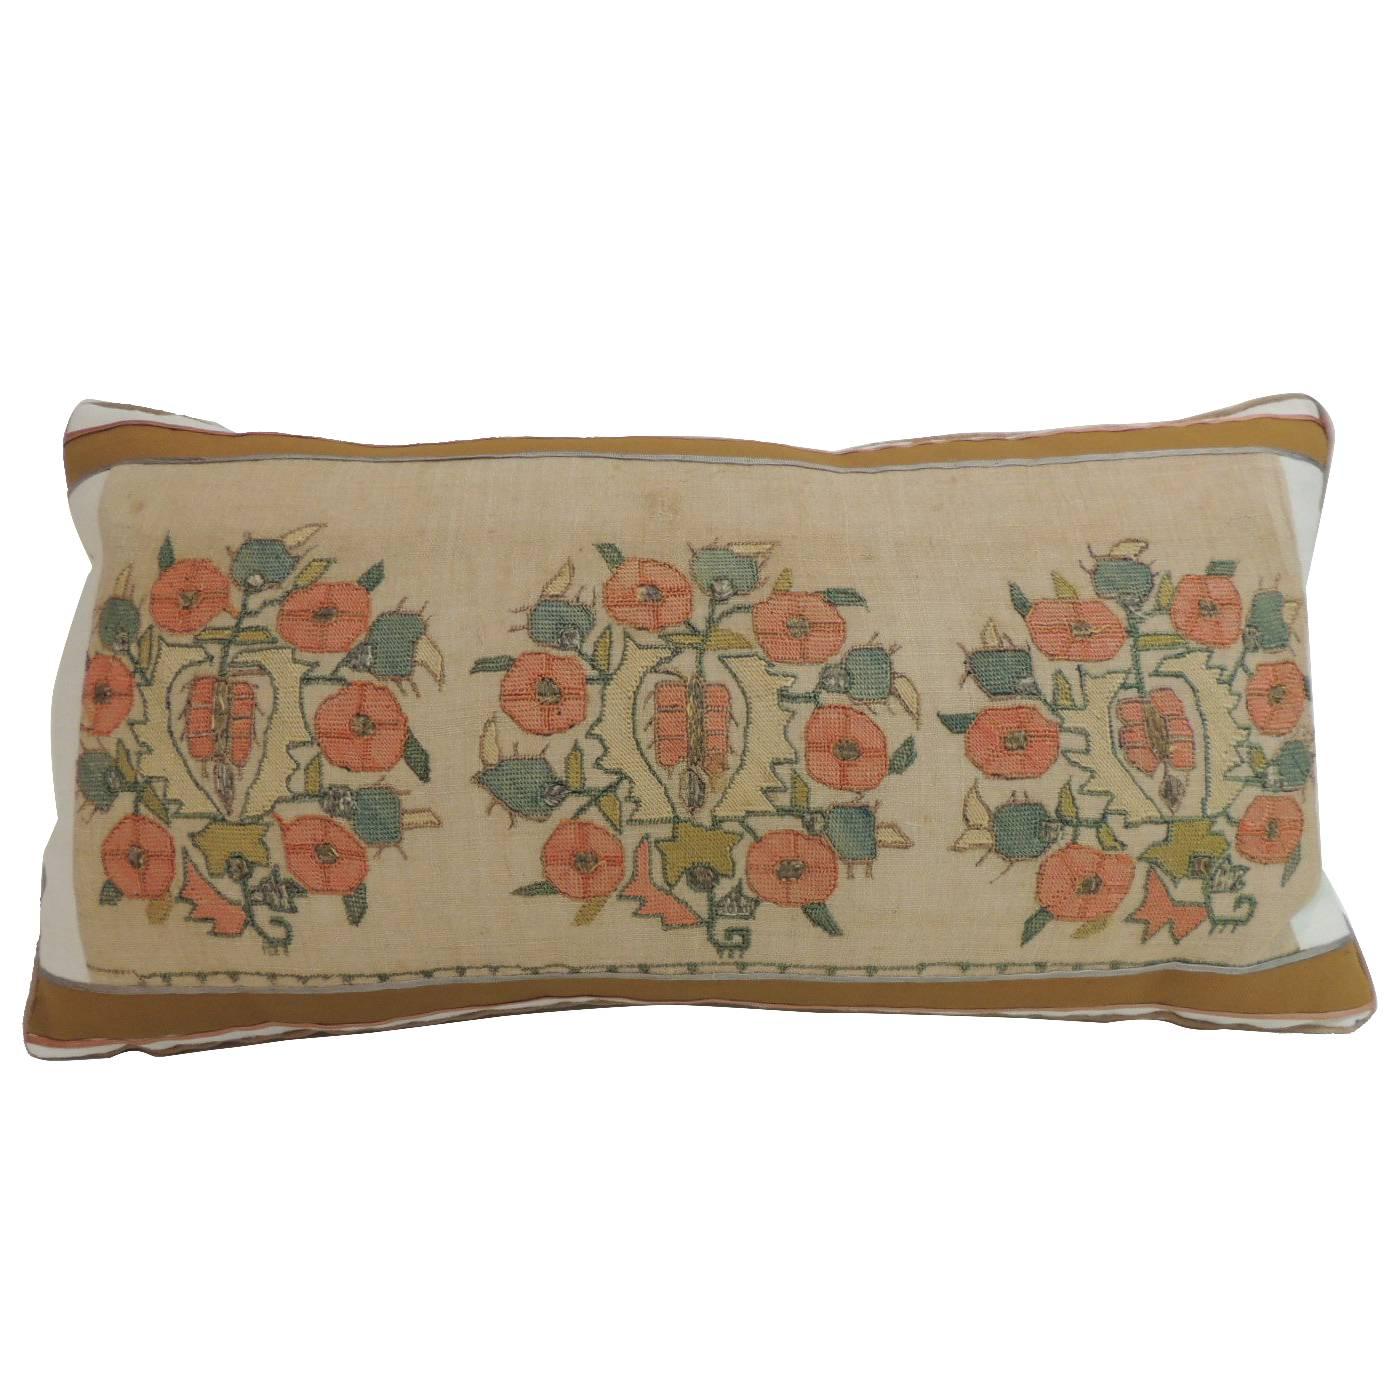 19th C. Turkish Orange and Green Floral Embroidery Decorative Bolster Pillow